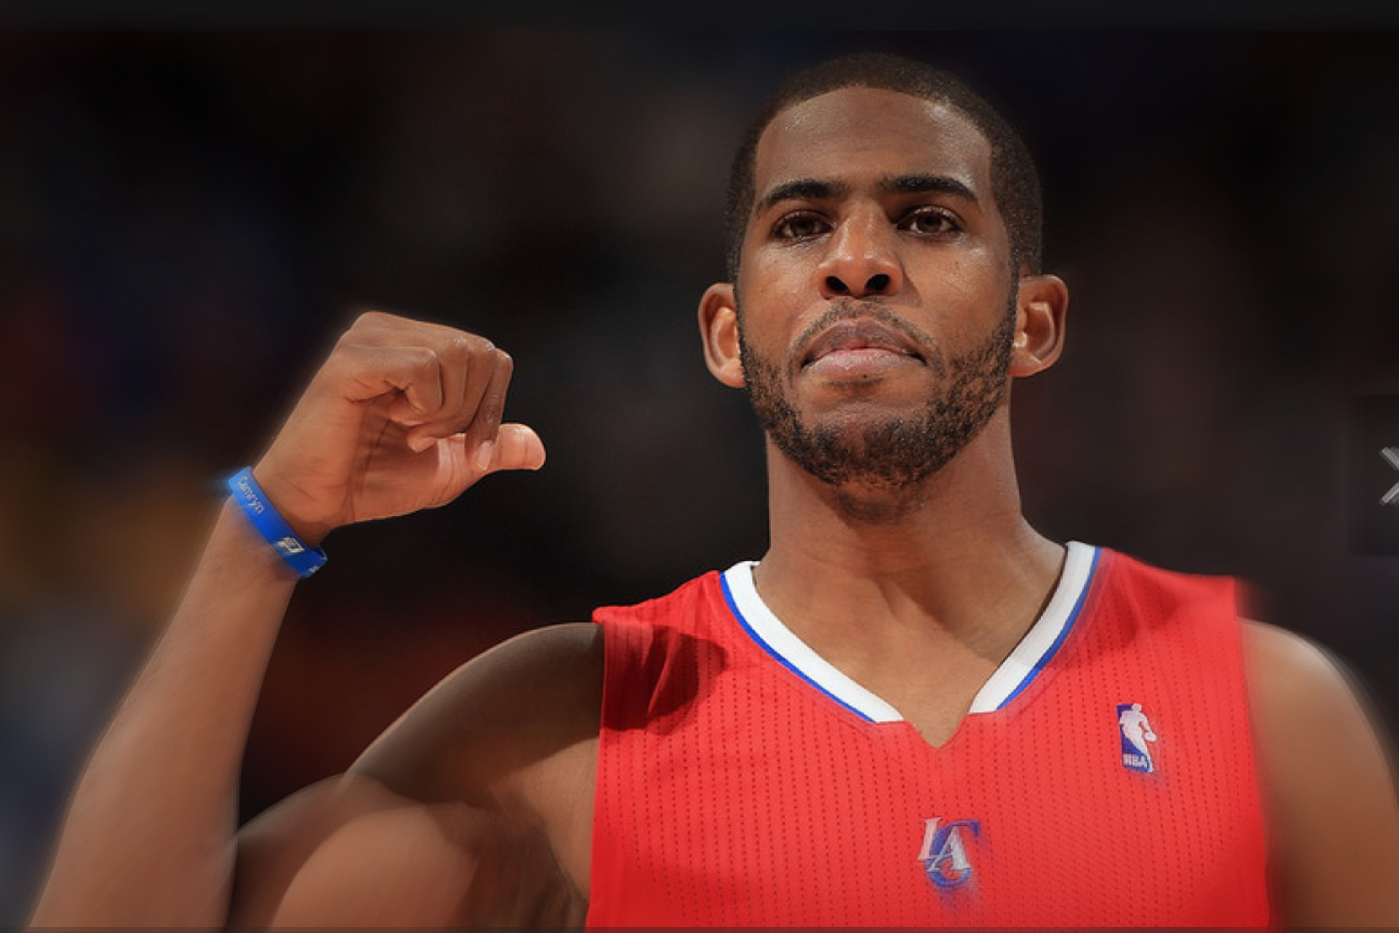 Chris Paul To Re-Sign With The Houston Rockets